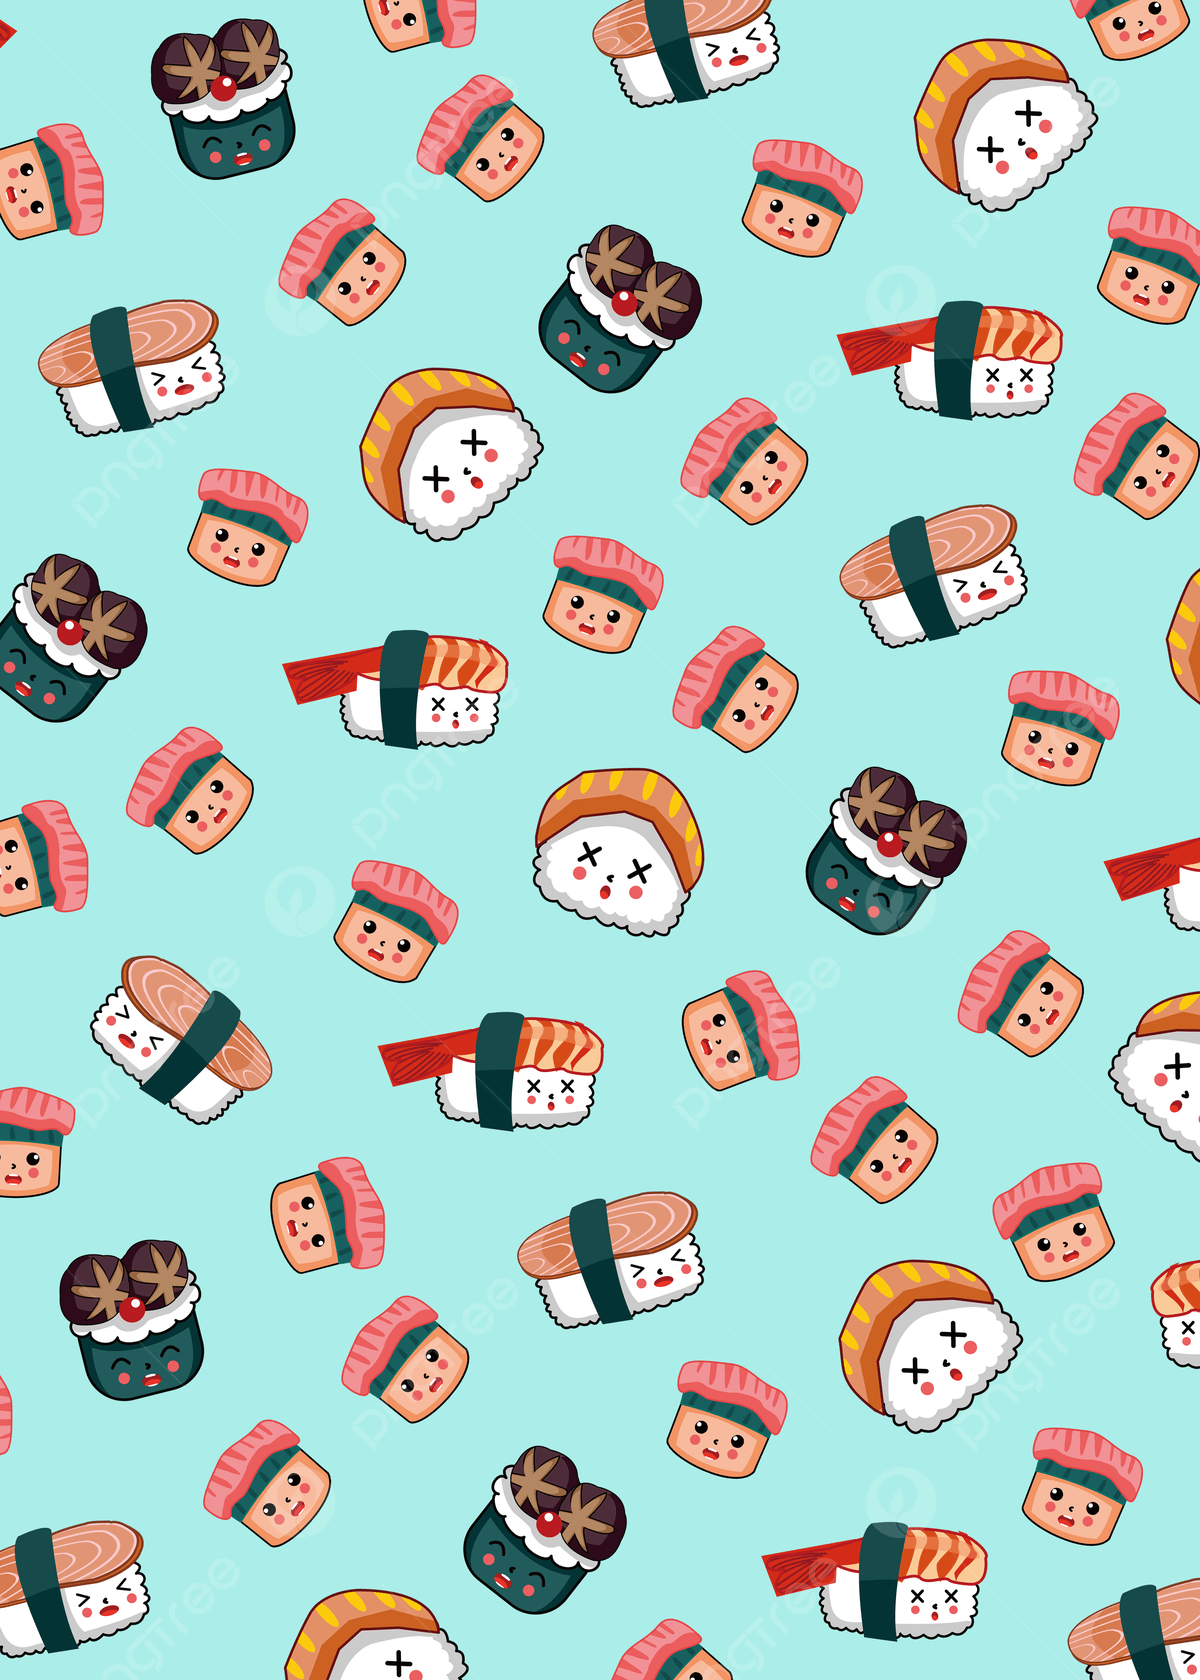 Delicious Fish Cute Cartoon Sushi Background Wallpaper Image For Free Download